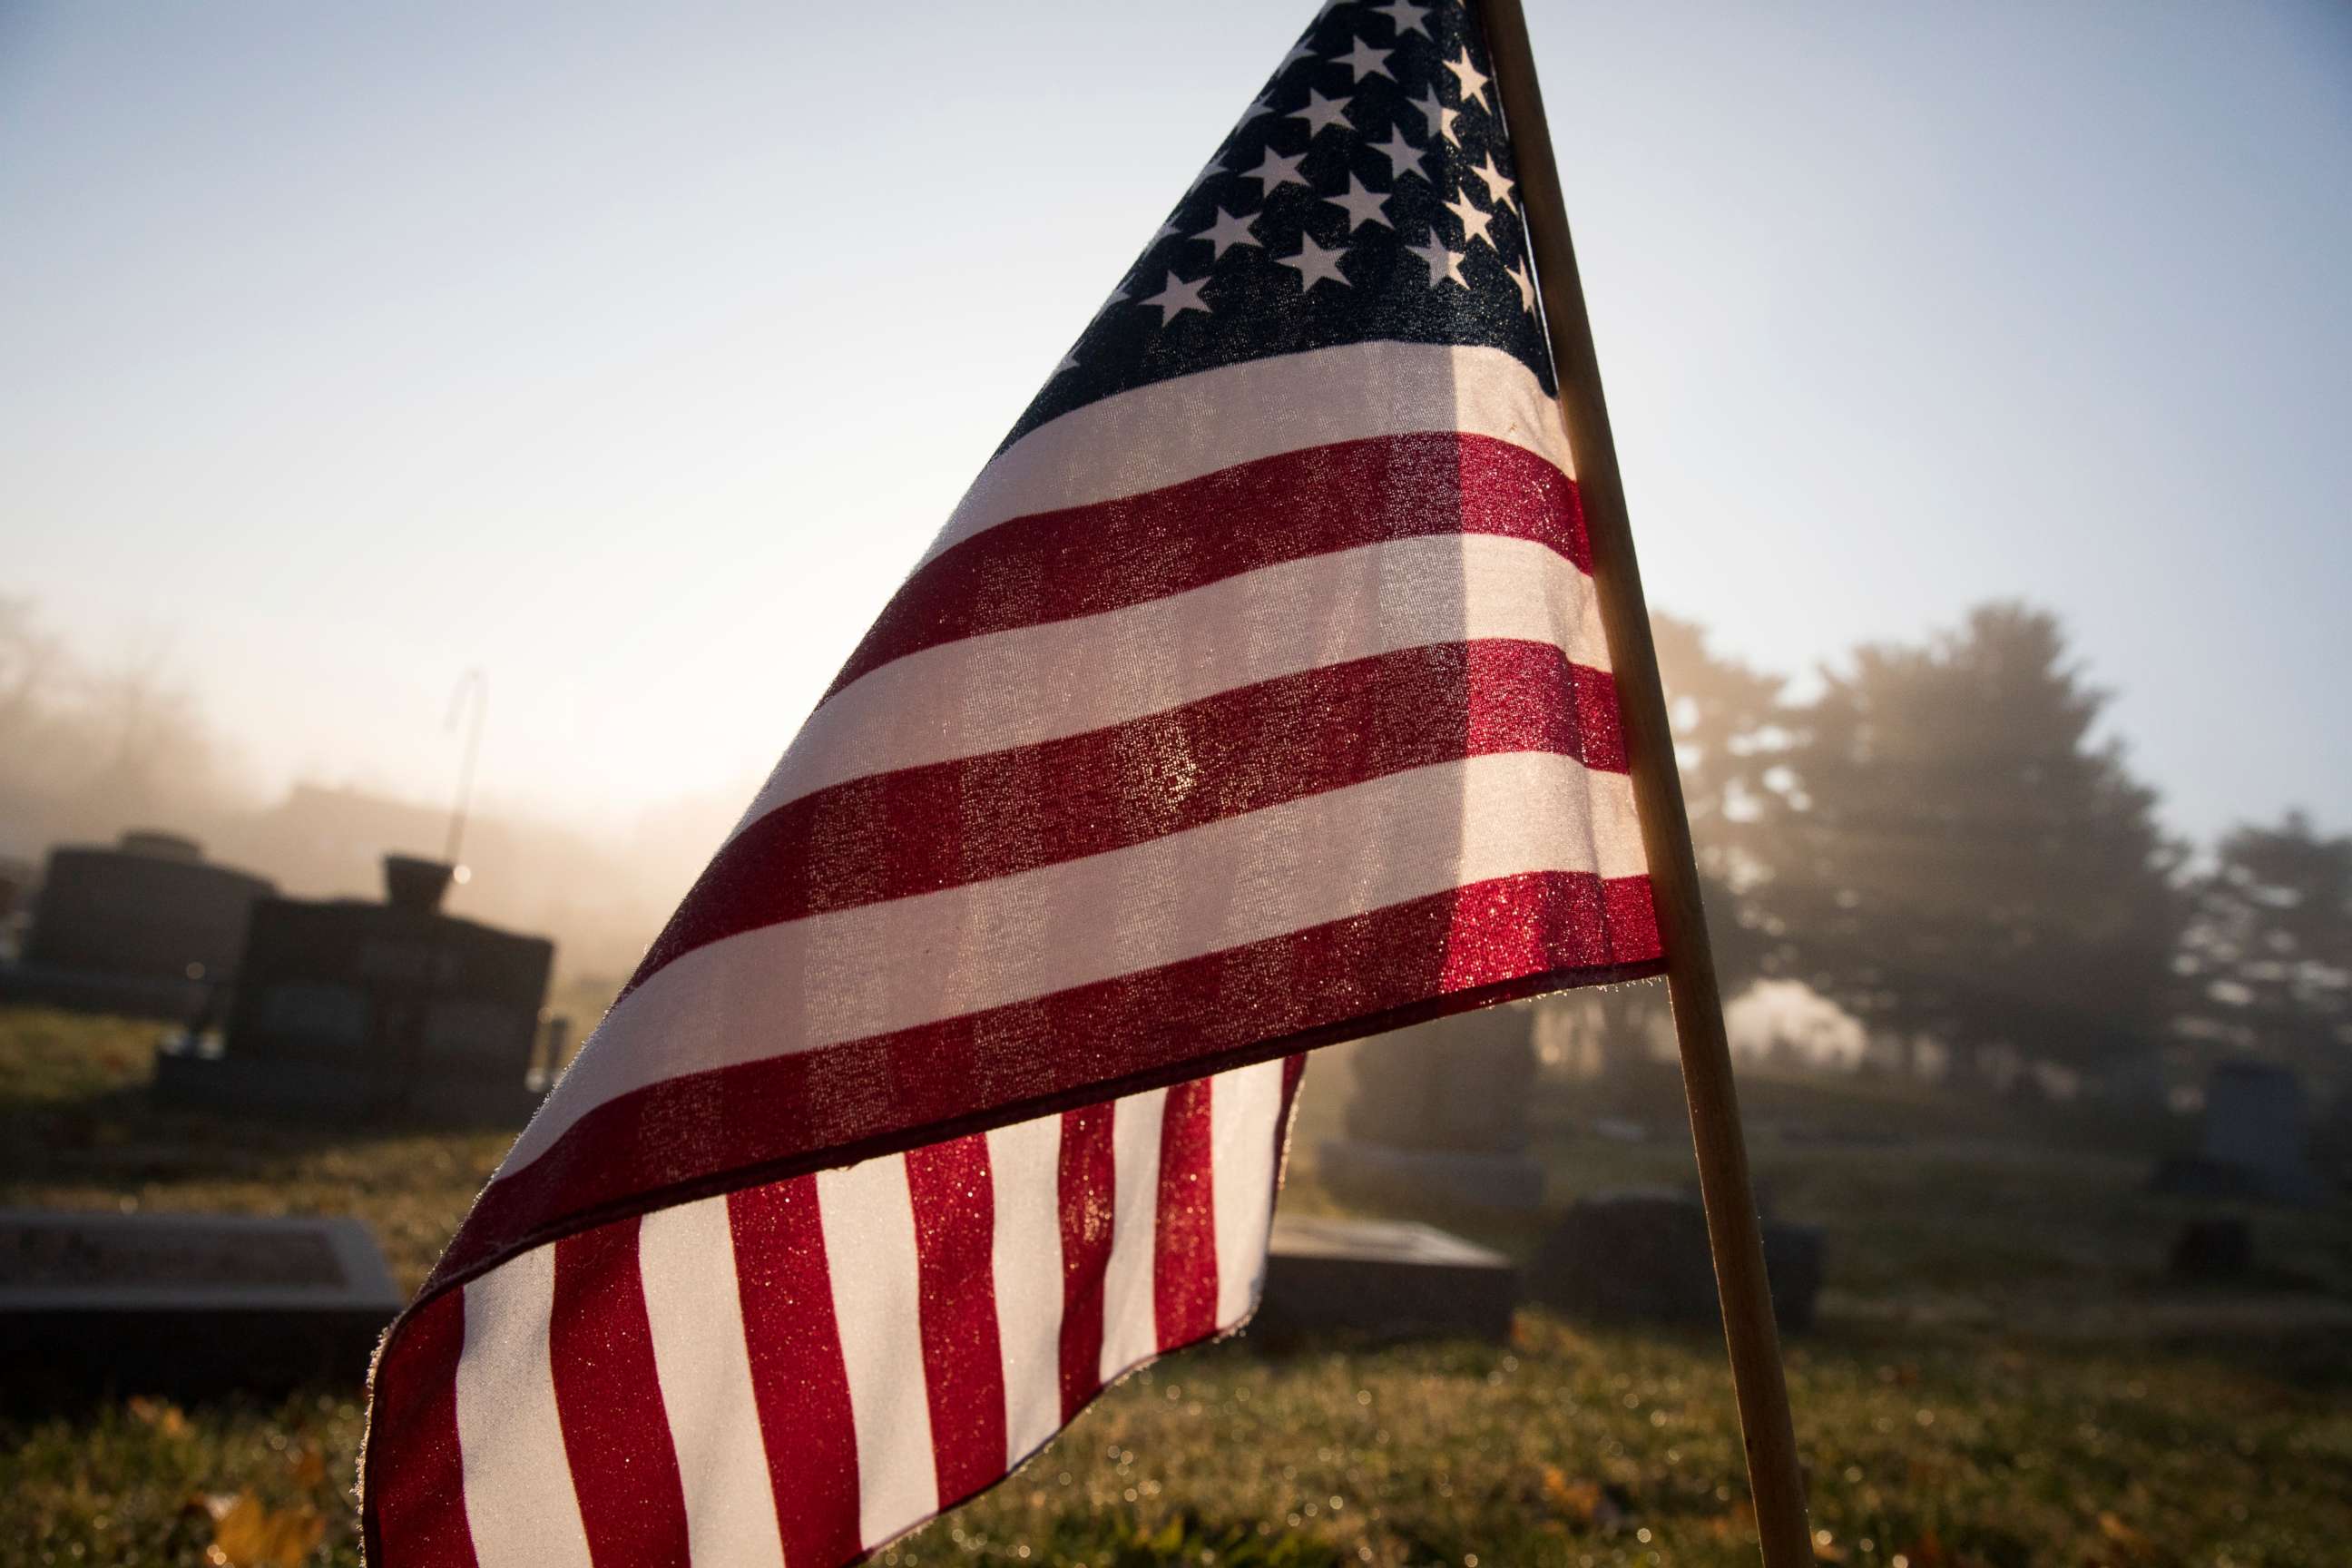 PHOTO: An American flag flies at a grave in this stock photo.